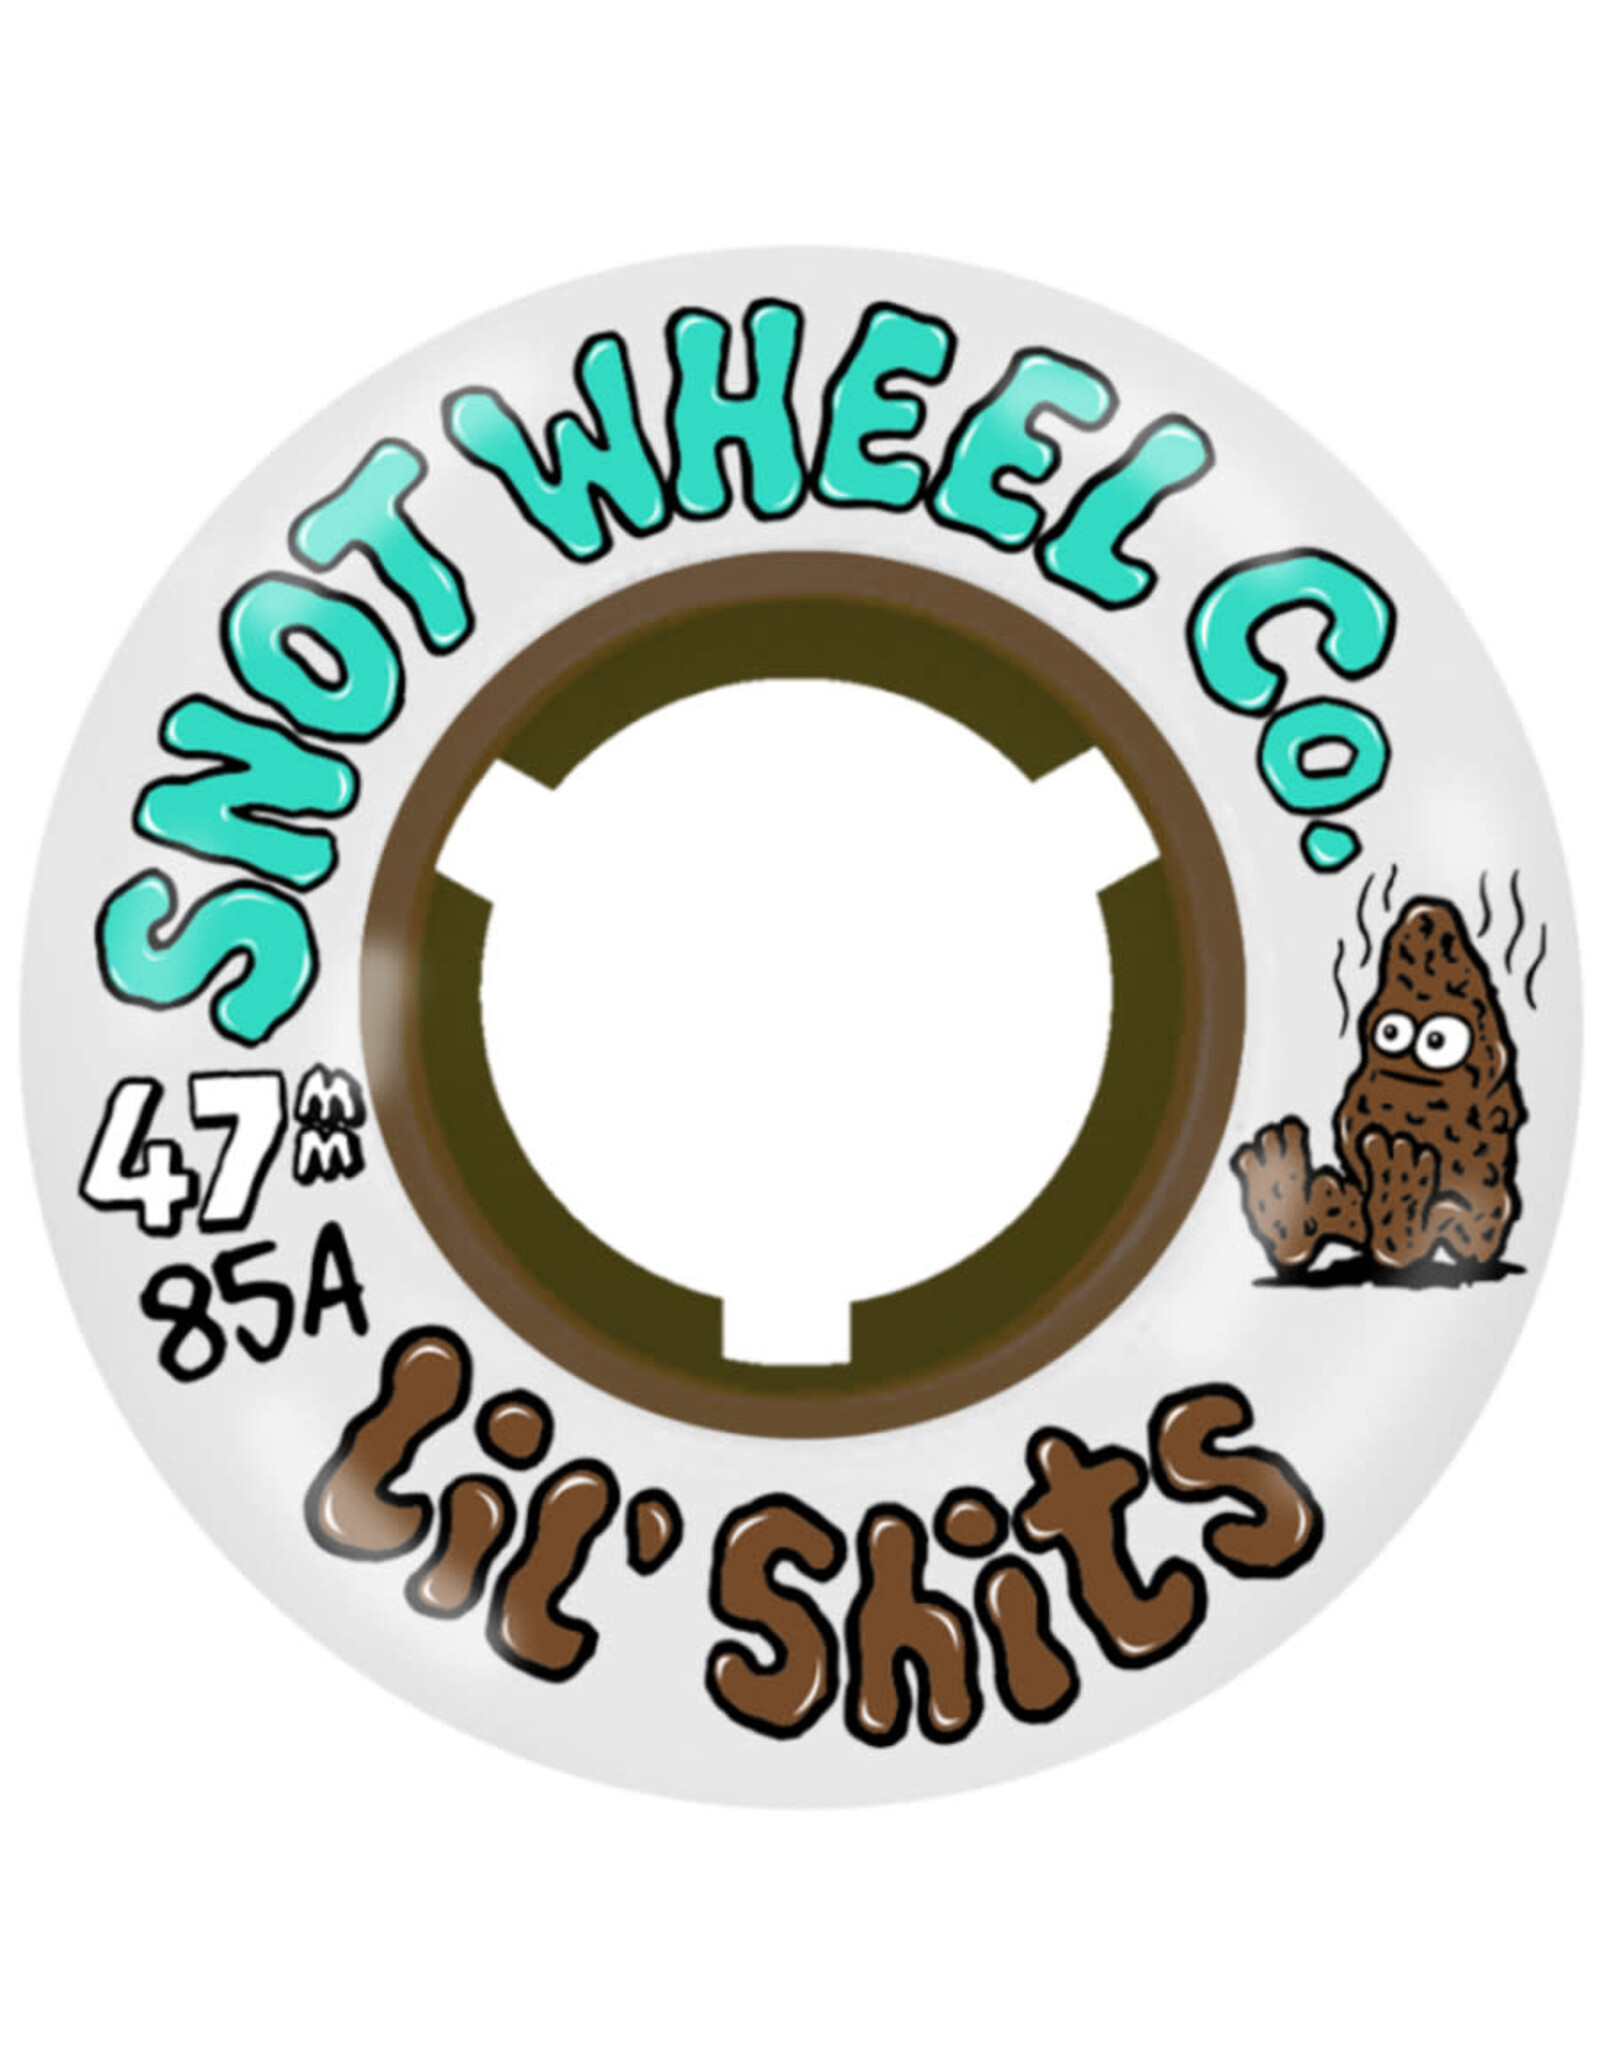 Snot Snot Wheels Team Lil Shits (47mm/85a)